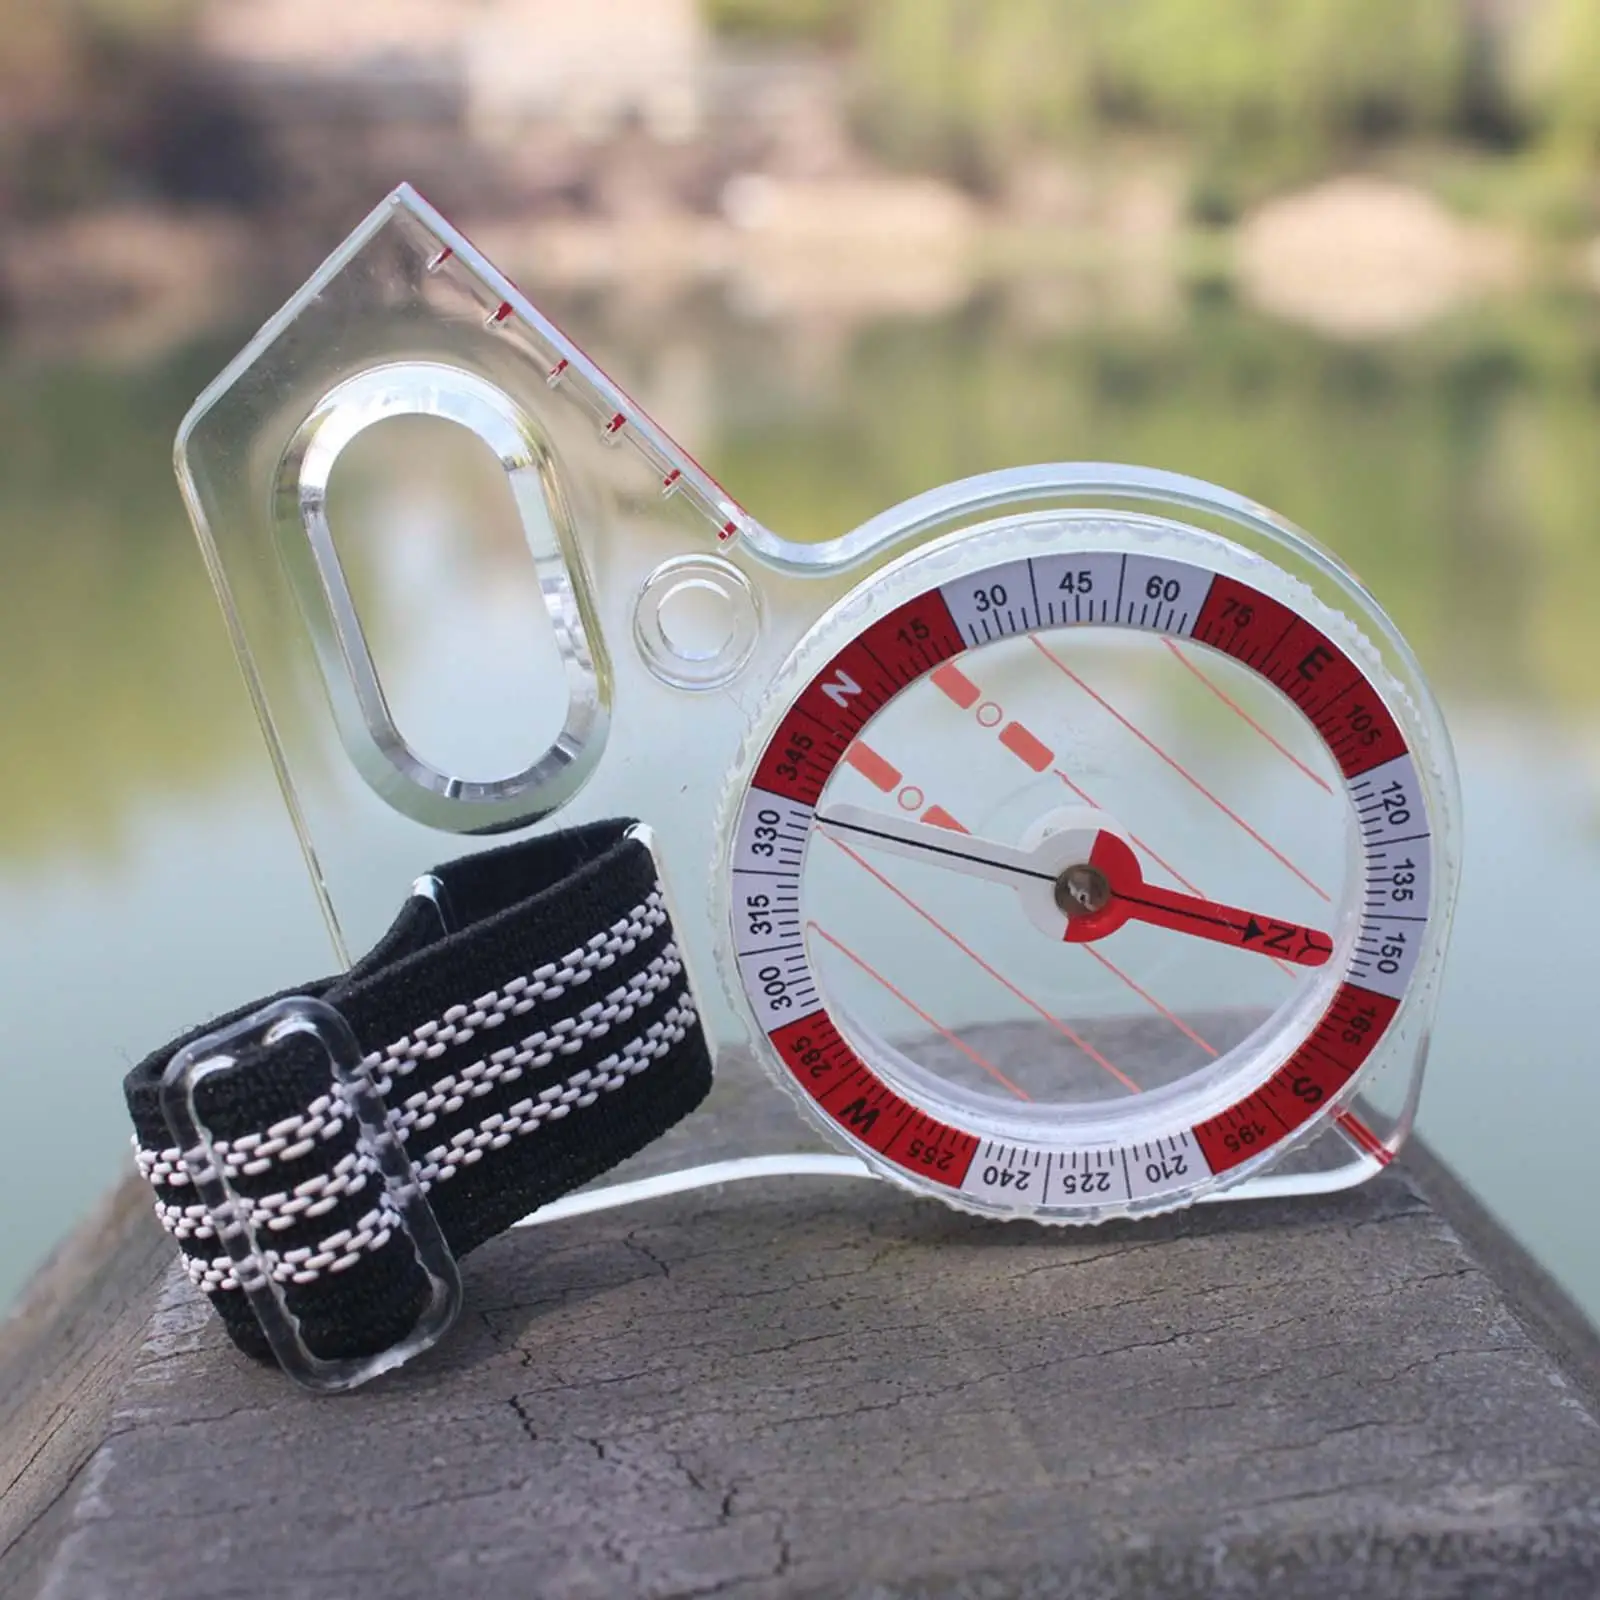 Compass Portable Survival Navigation Aim Professional Tournament Compass Map Scale Orienteering Compass for Camping Backpacking